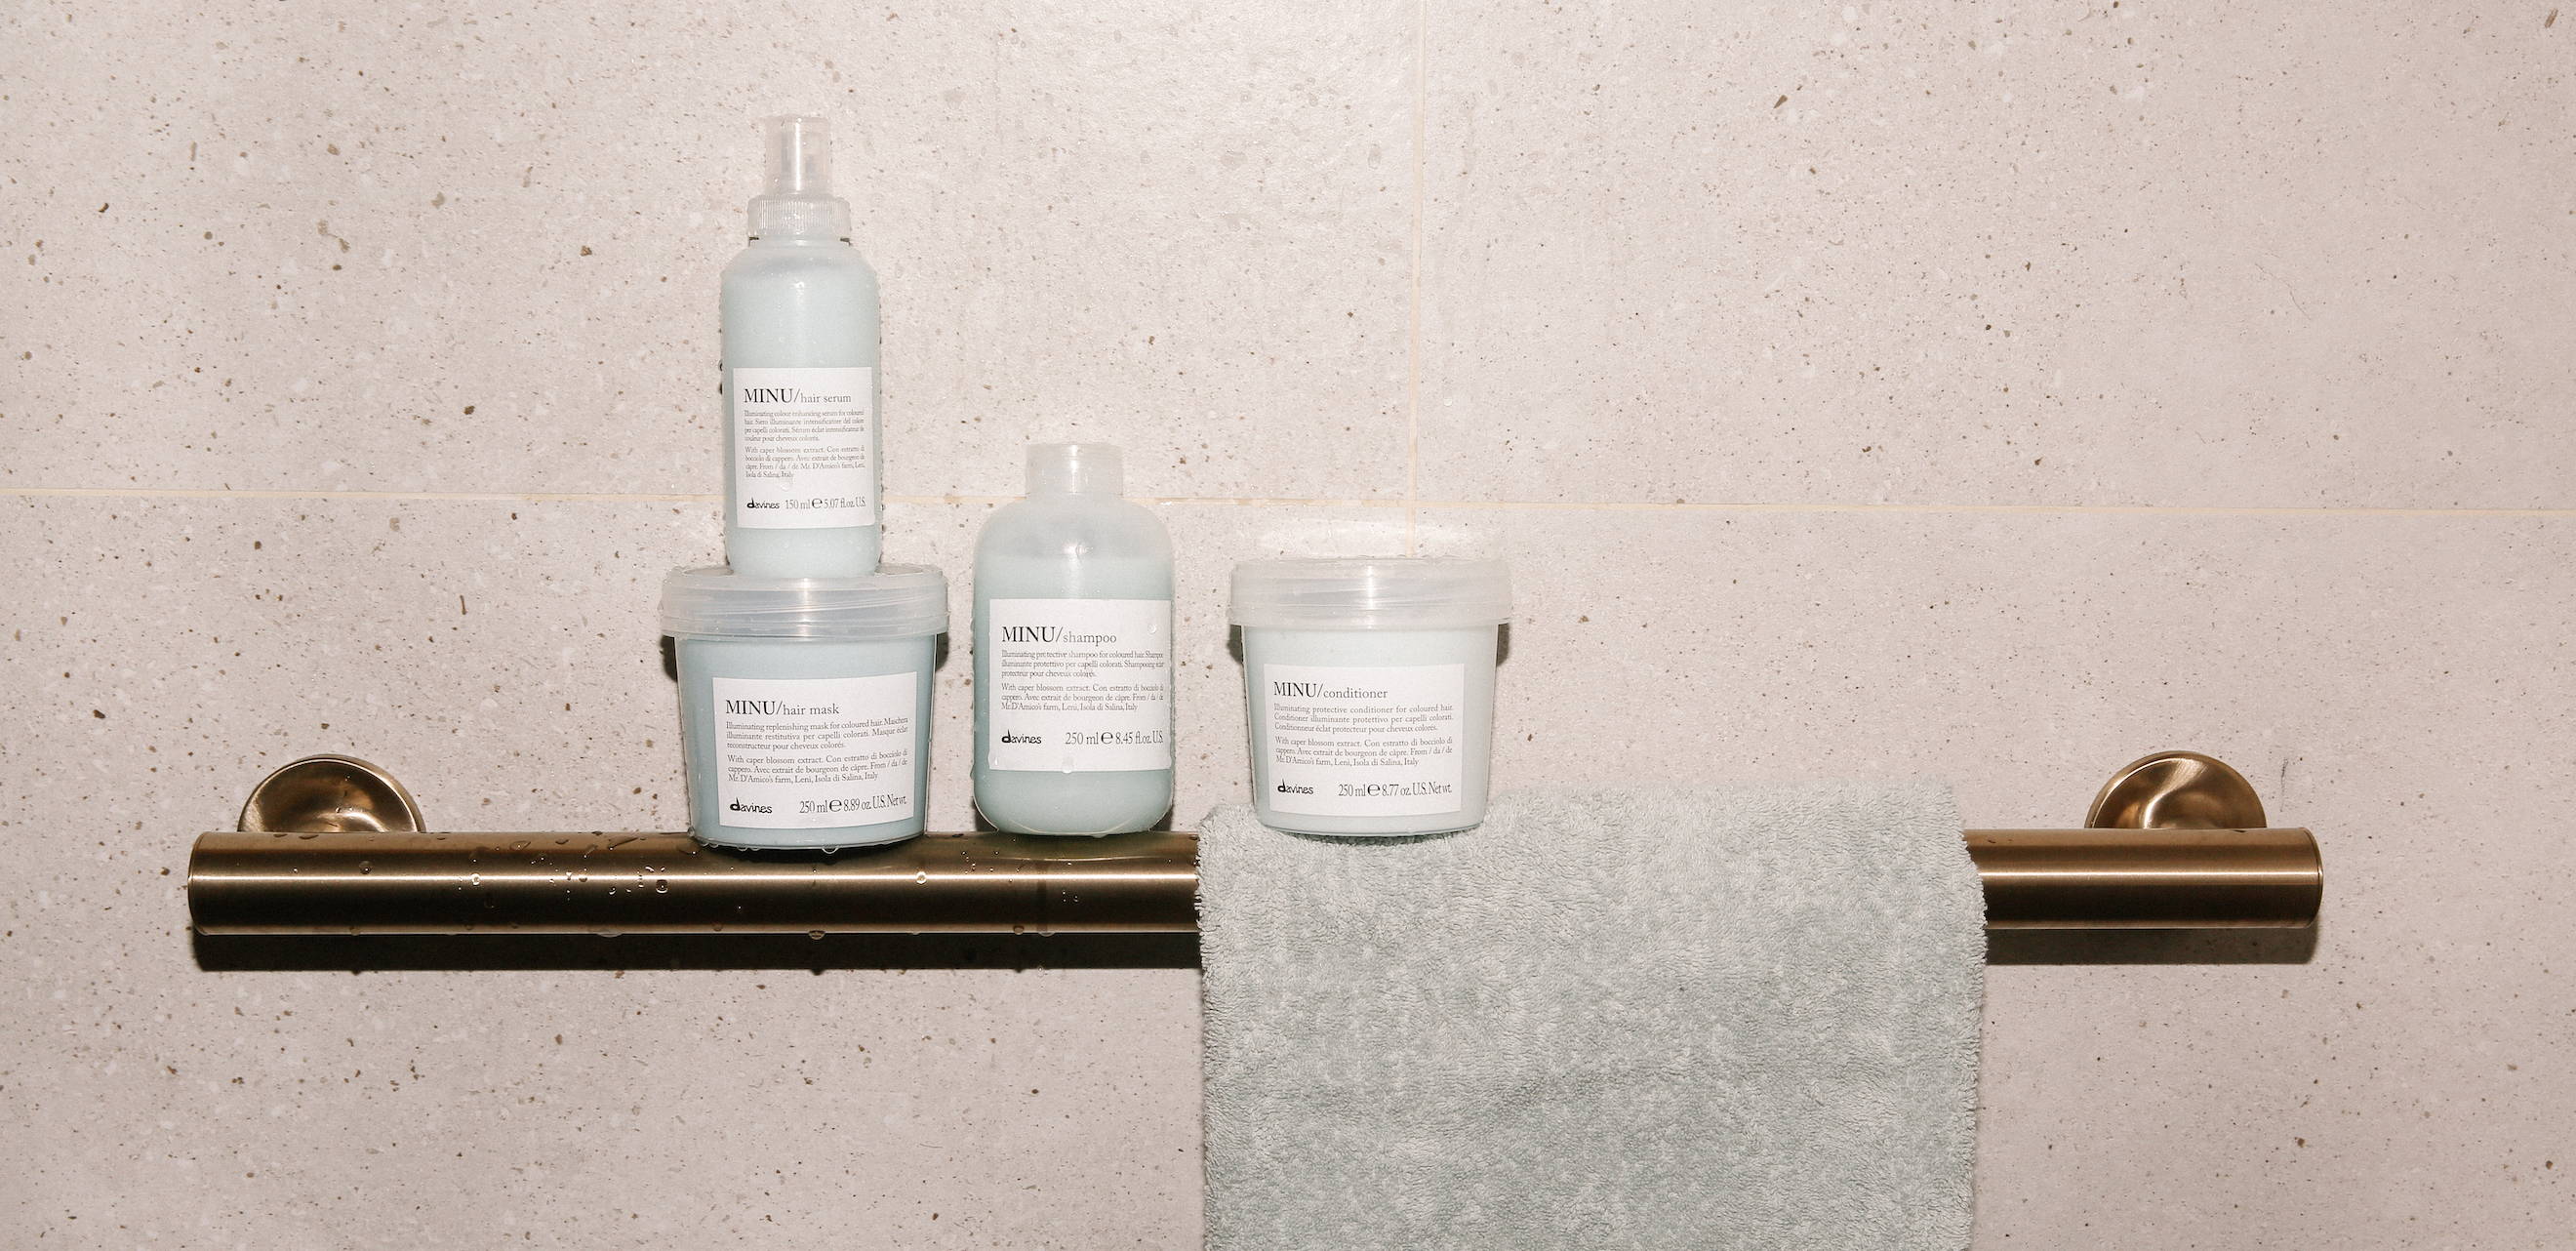 Davines MINU products for colored hair